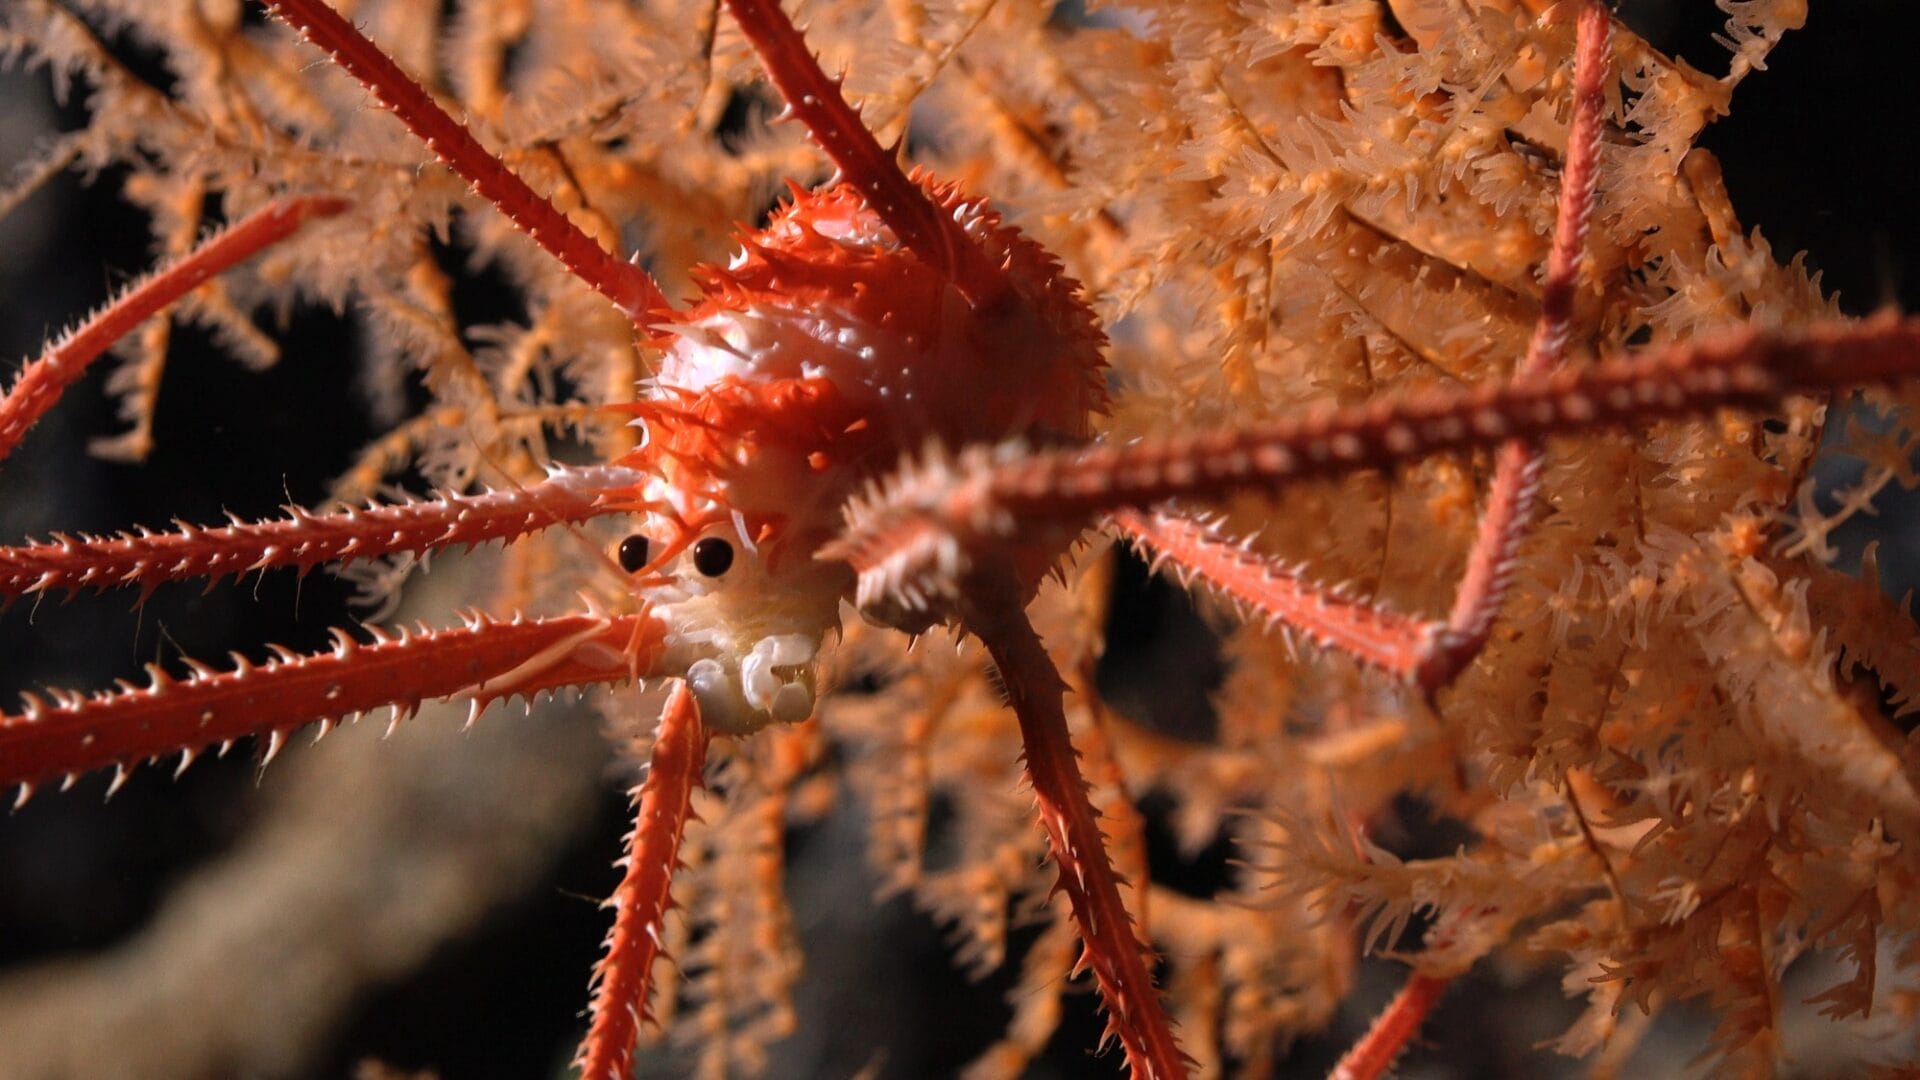 a spiny lobster in a coral